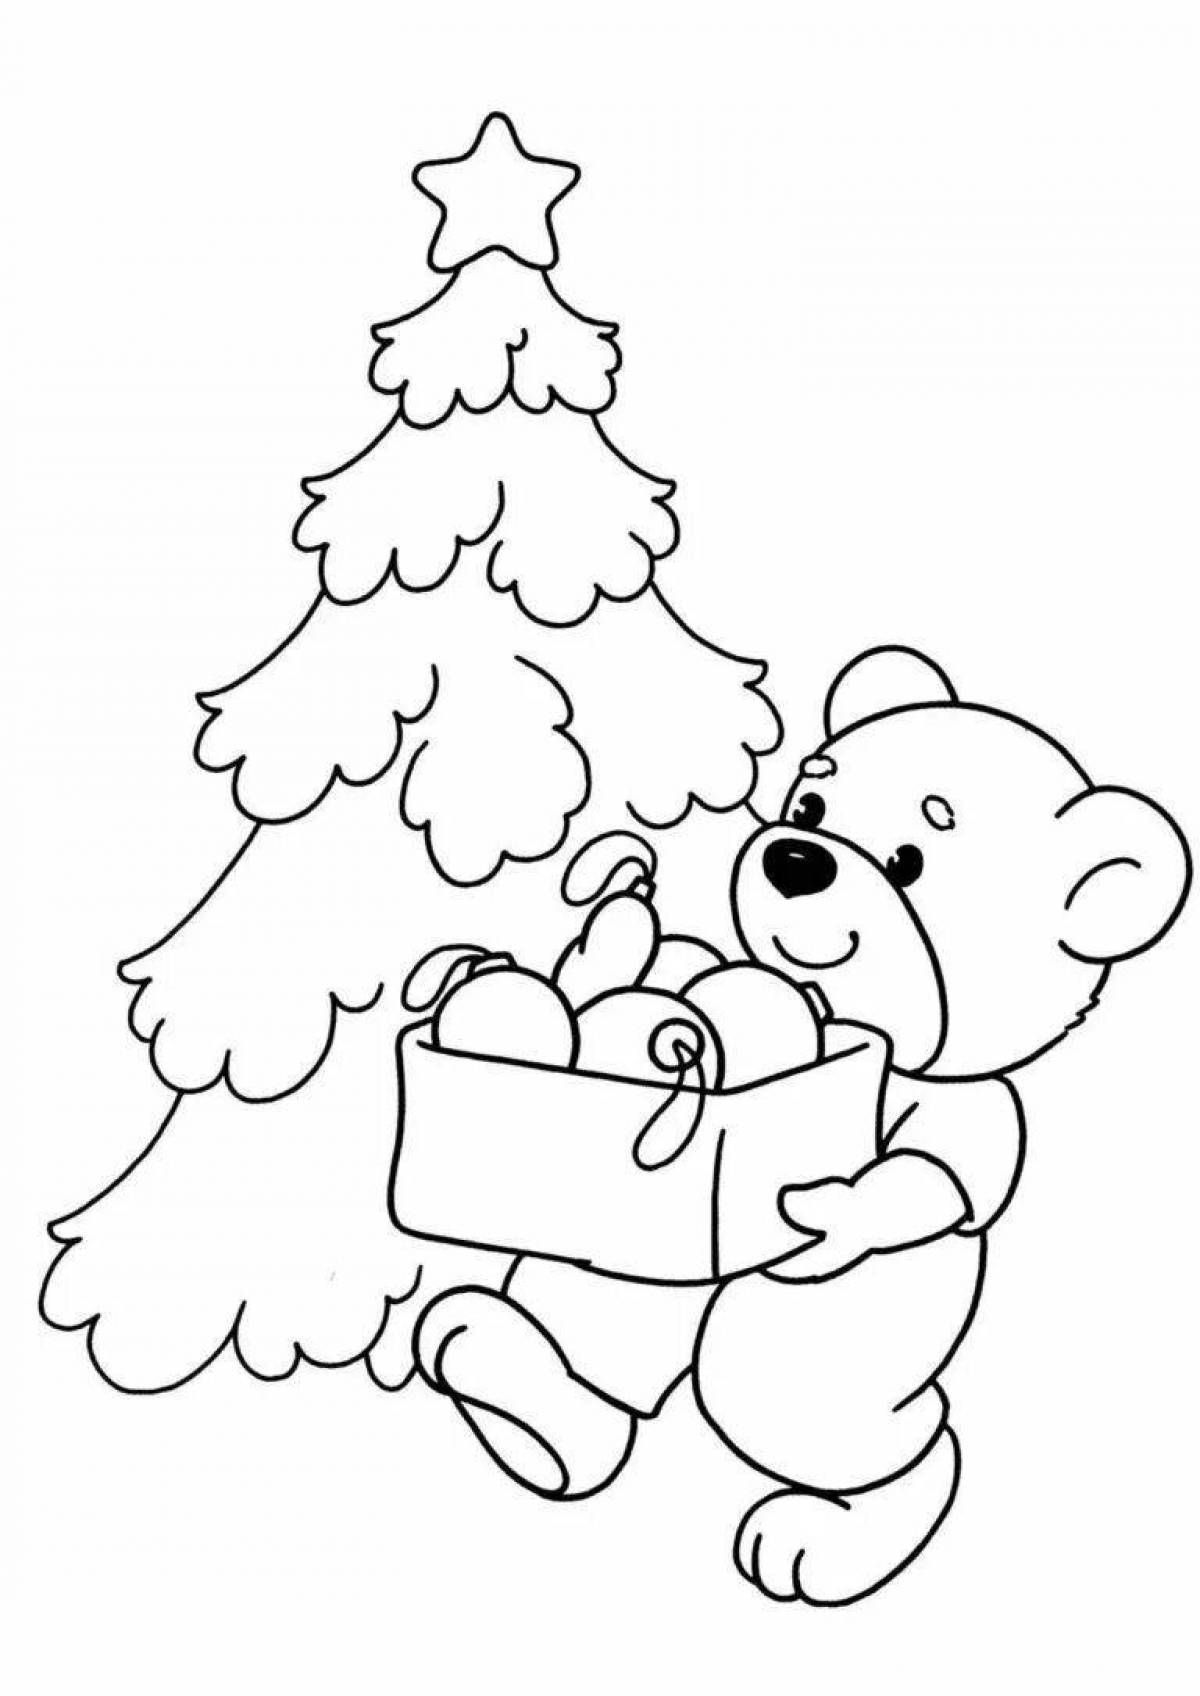 Great Christmas coloring book for preschoolers